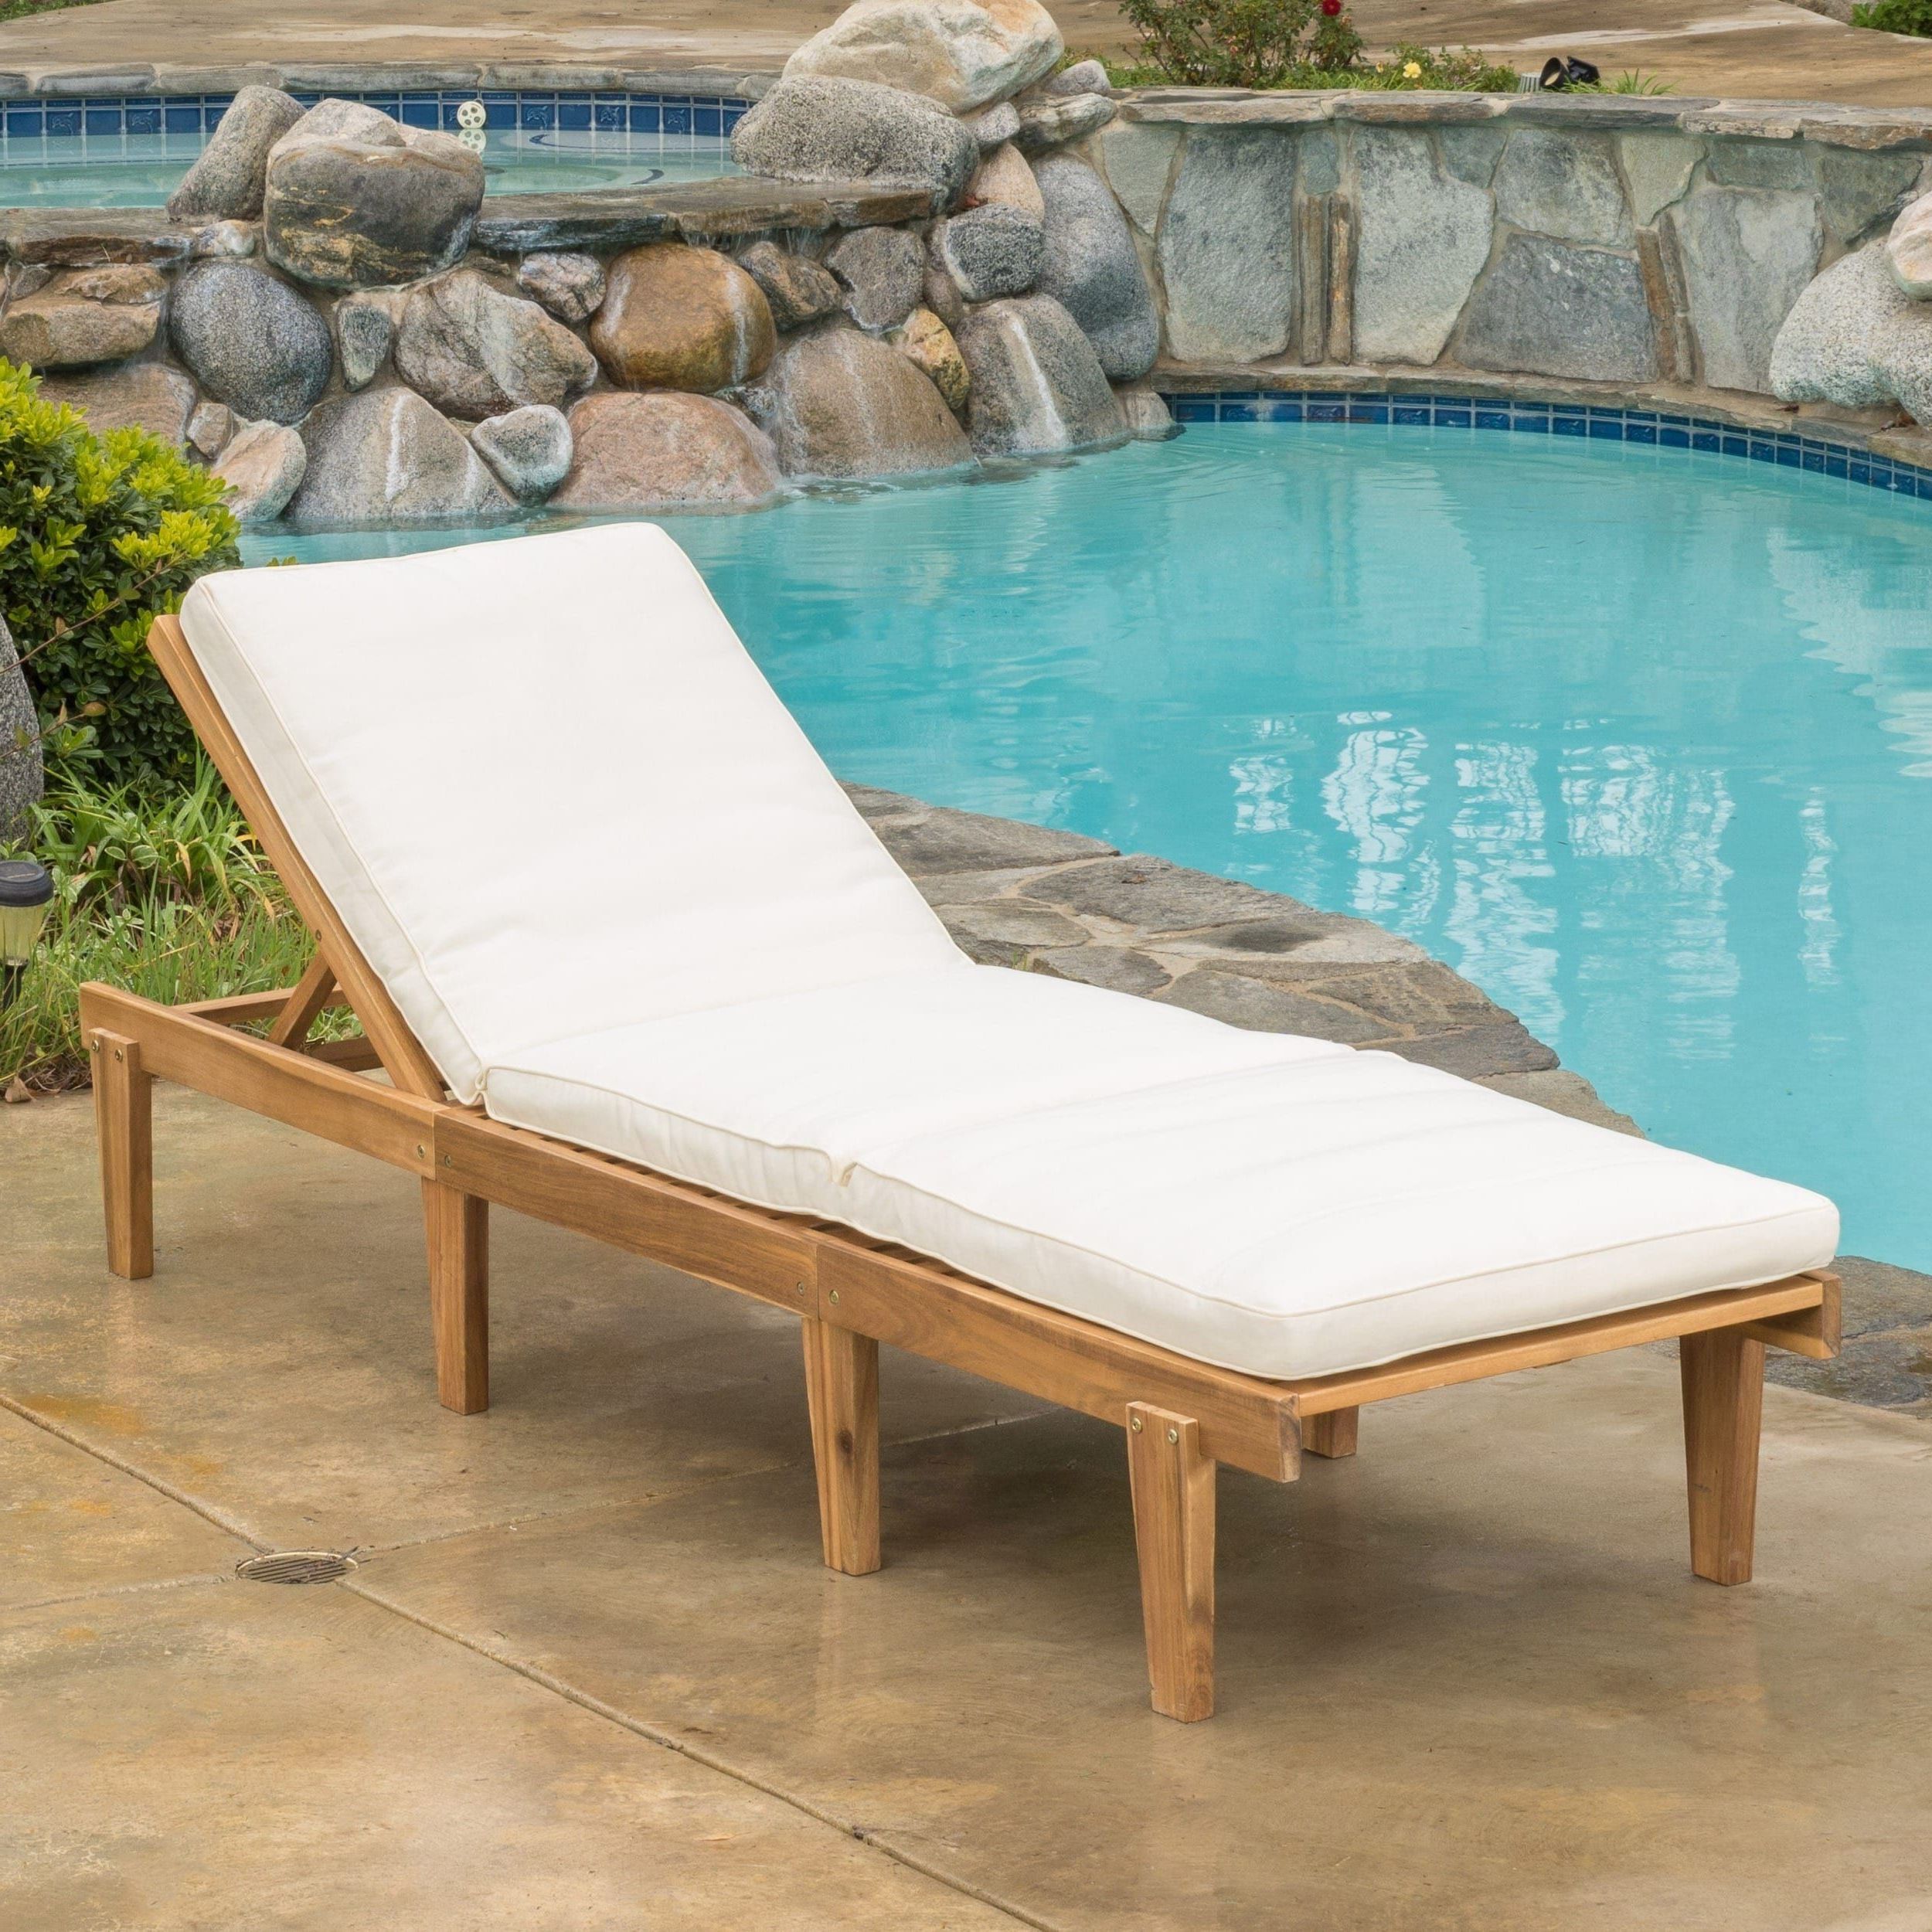 Ariana Acacia Outdoor Wood Chaise Lounge With Cushion Within Famous Outdoor Rustic Acacia Wood Chaise Lounges With Wicker Seat (View 13 of 25)